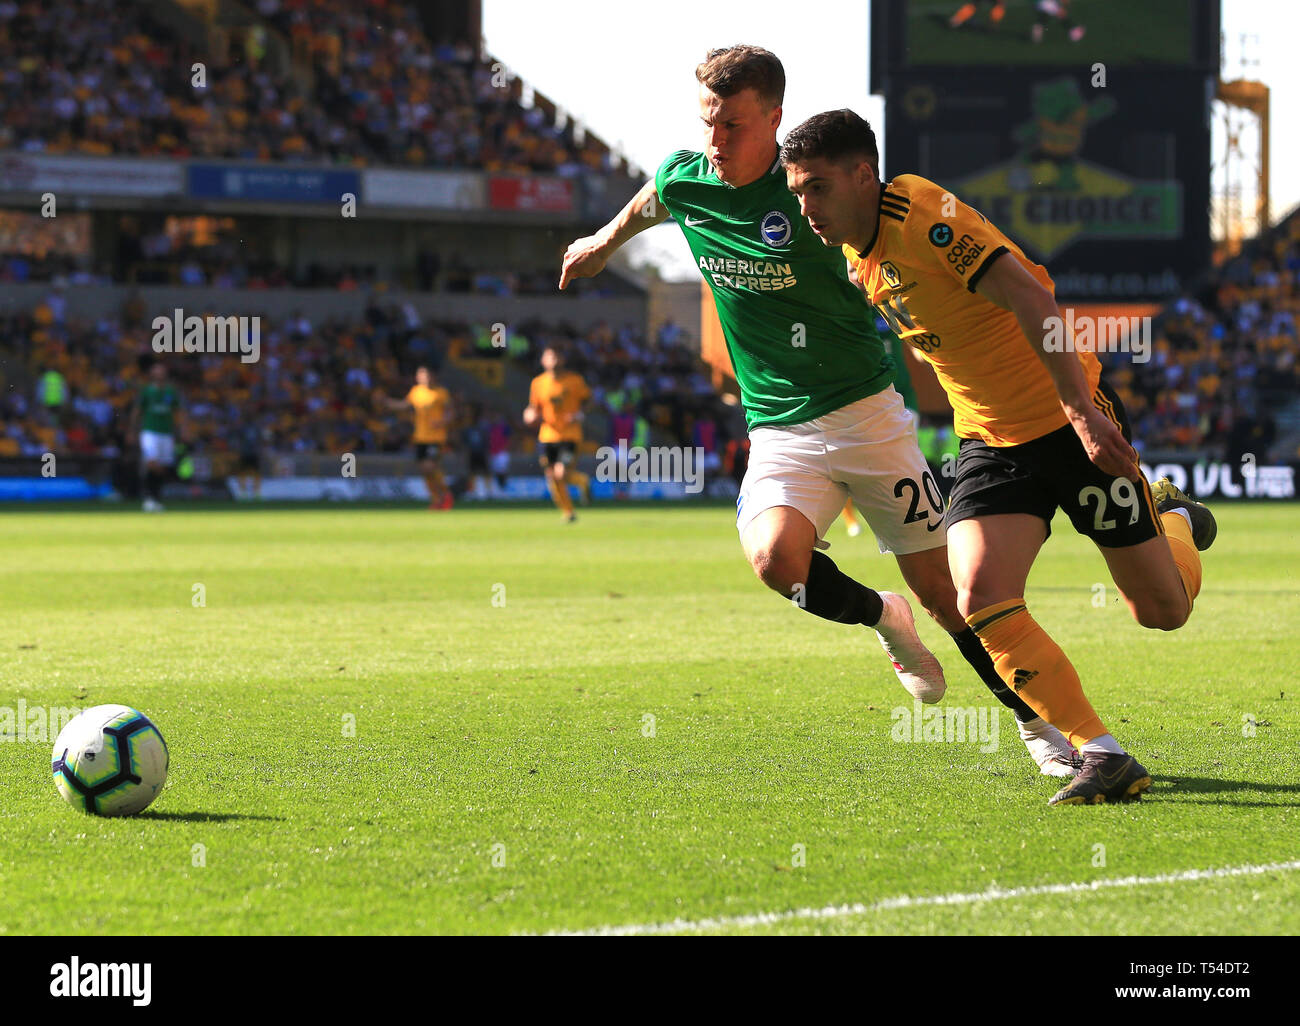 Wolverhampton, UK. 20th Apr, 2019. Ruben Vinagre of Wolverhampton Wanderers battles for the ball with Solly March of Brighton and Hove Albion Credit: Paul Roberts/OneUpTop/Alamy Live News Stock Photo